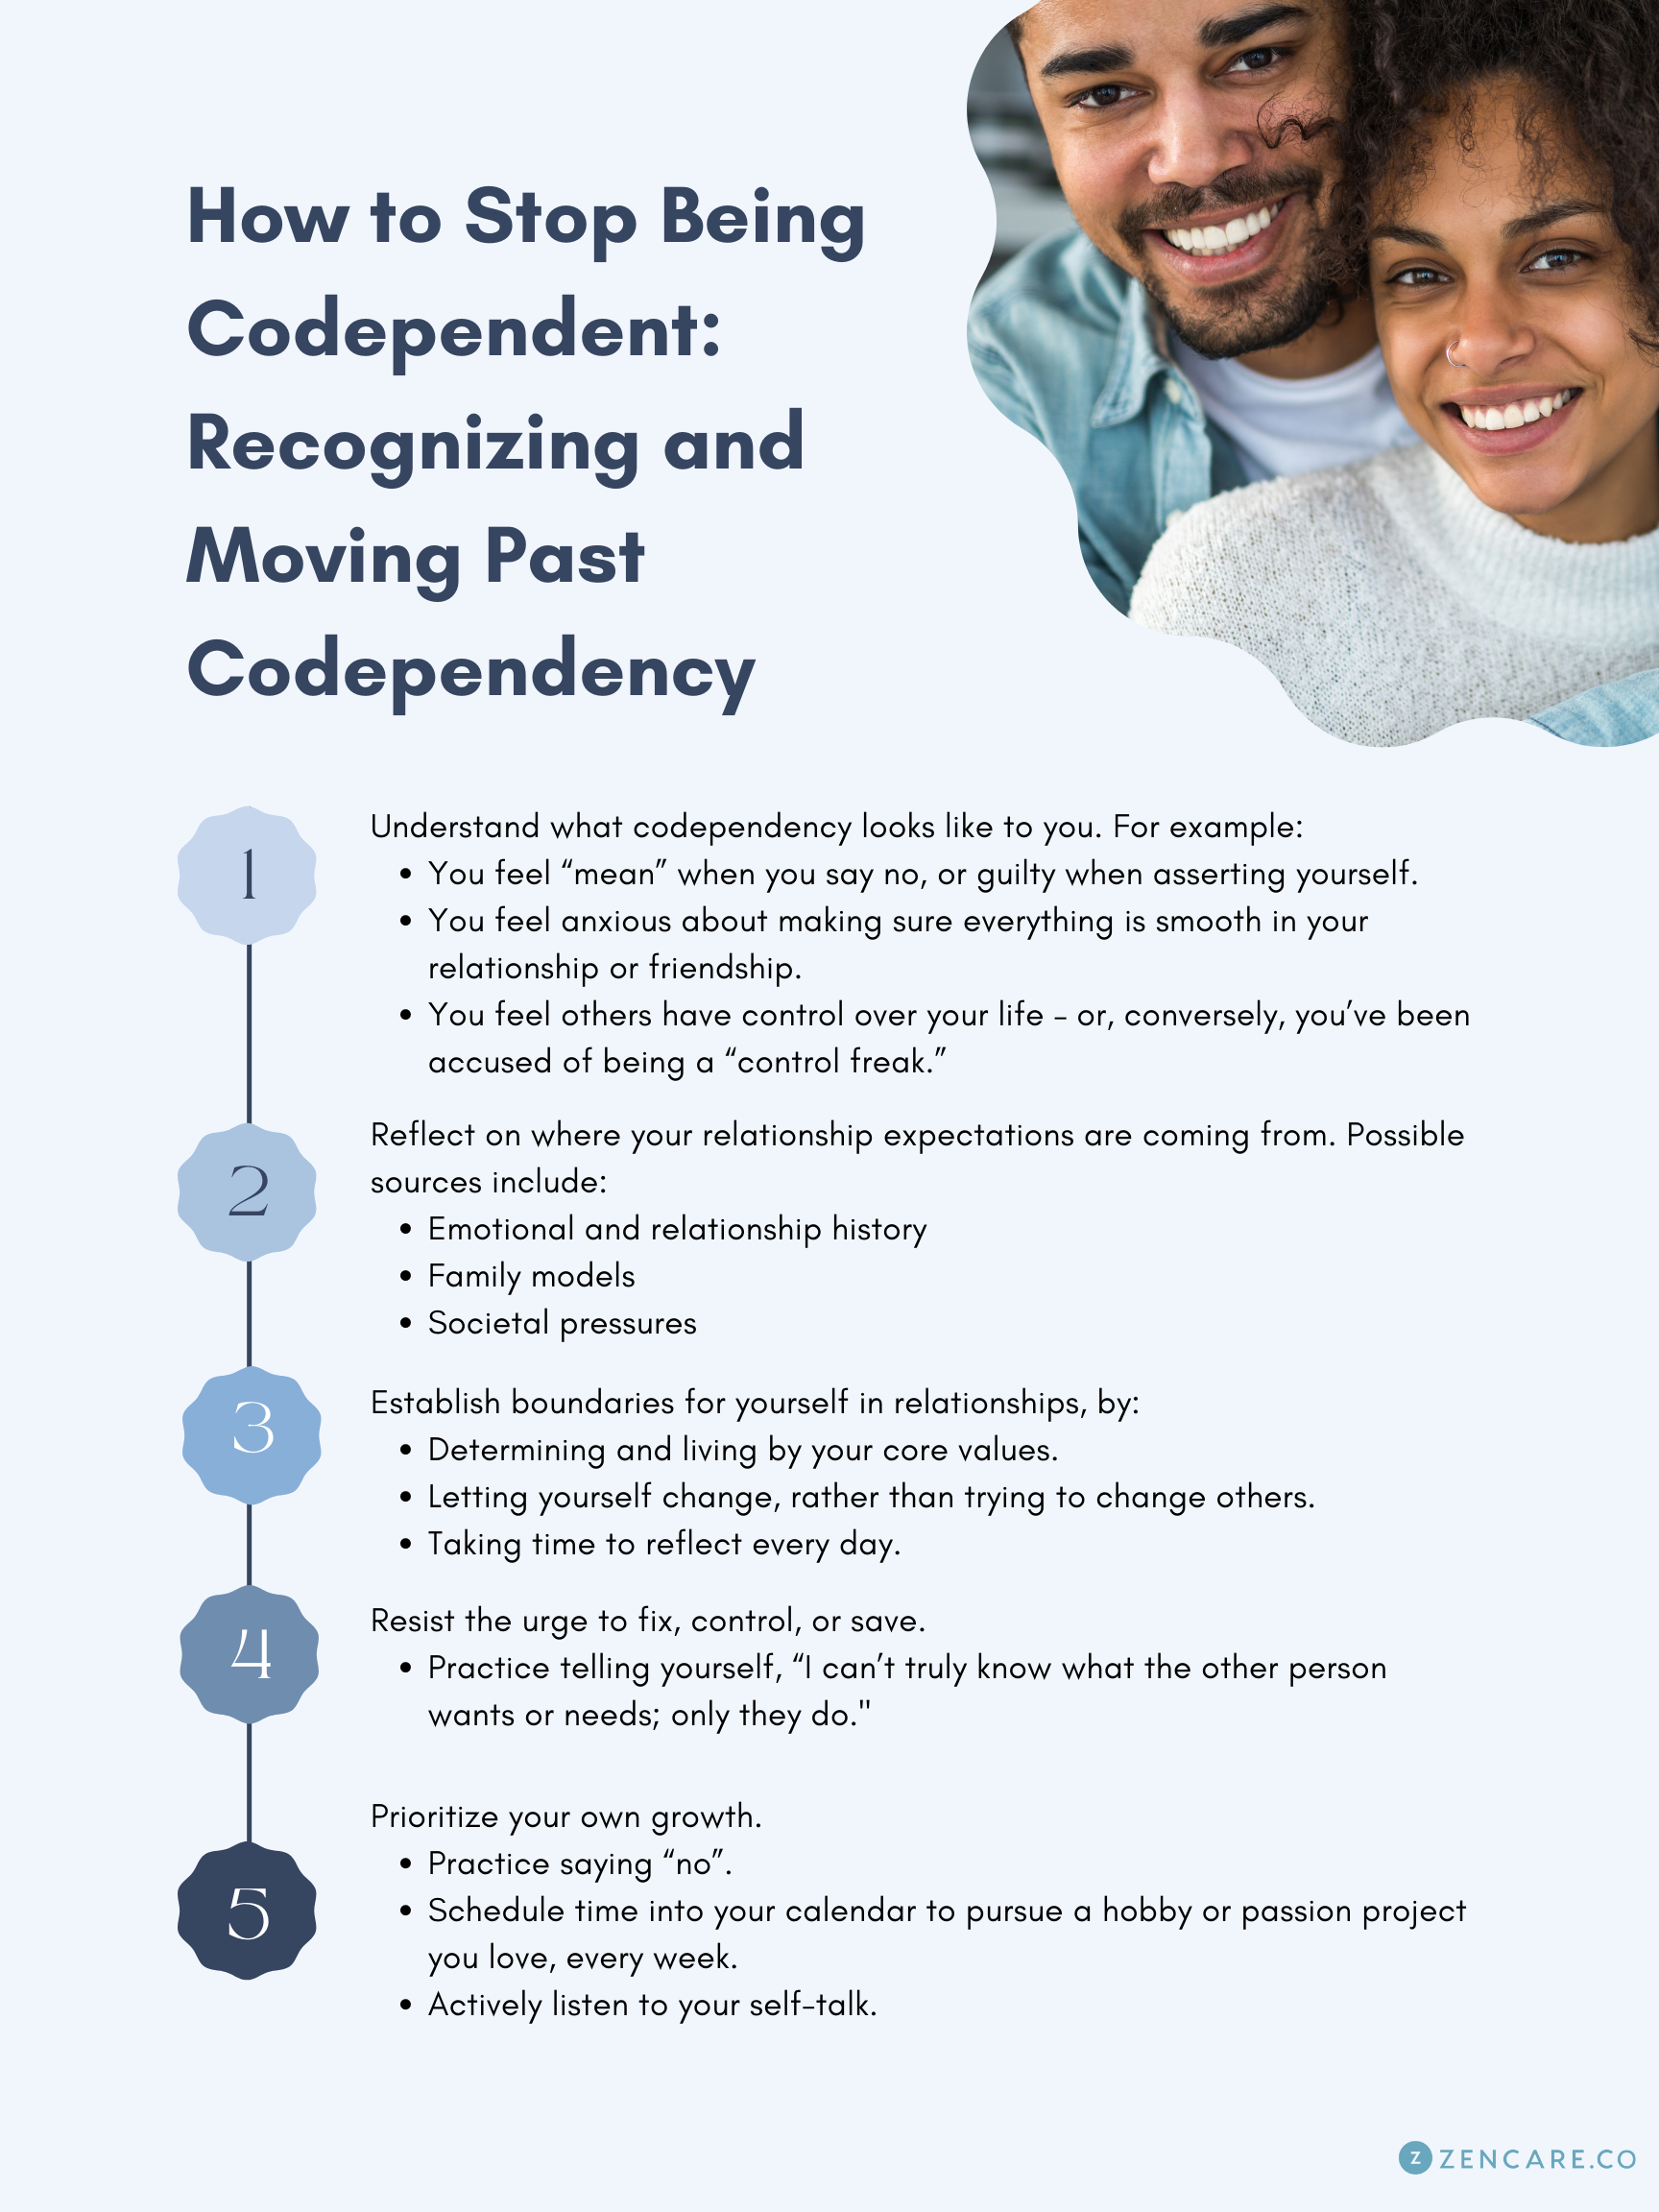 How to Stop Being Codependent: Recognizing and Moving Past Codependency Guide by Zencare